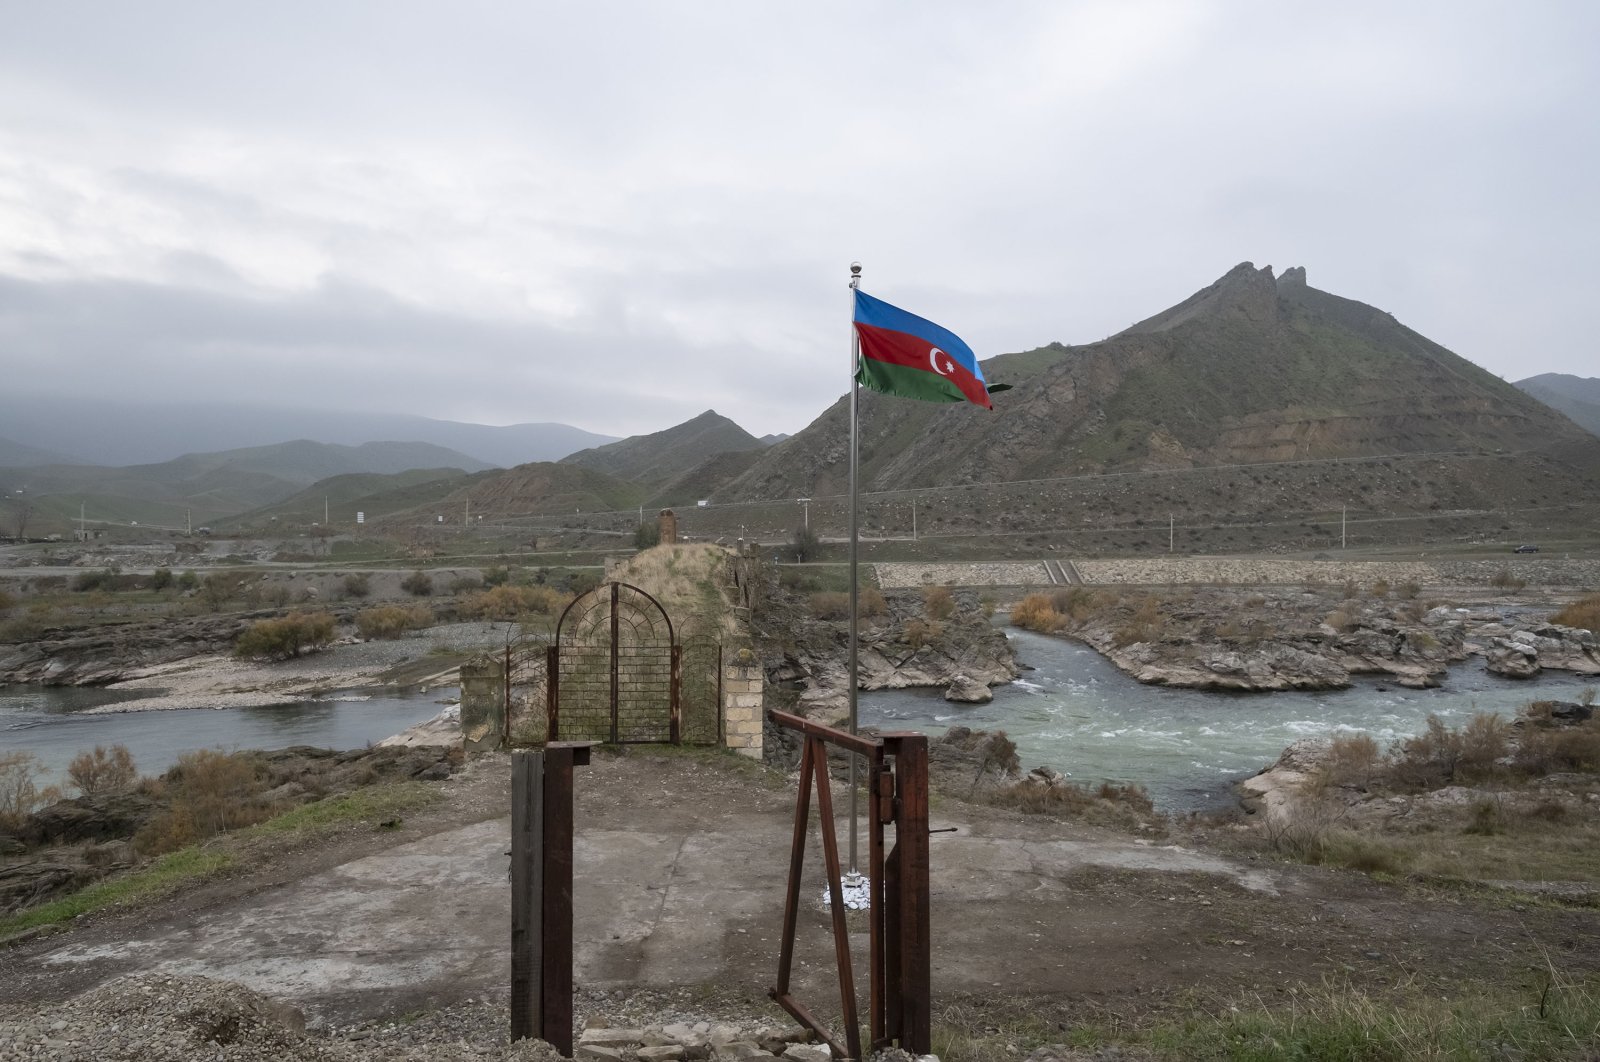 An Azerbaijani national flag flies next to the 13th century Khodaafarin Arch Bridge connecting the northern and southern banks of the Aras River located at the border of Azerbaijan and Iran, Dec. 15, 2020. (Getty Images)